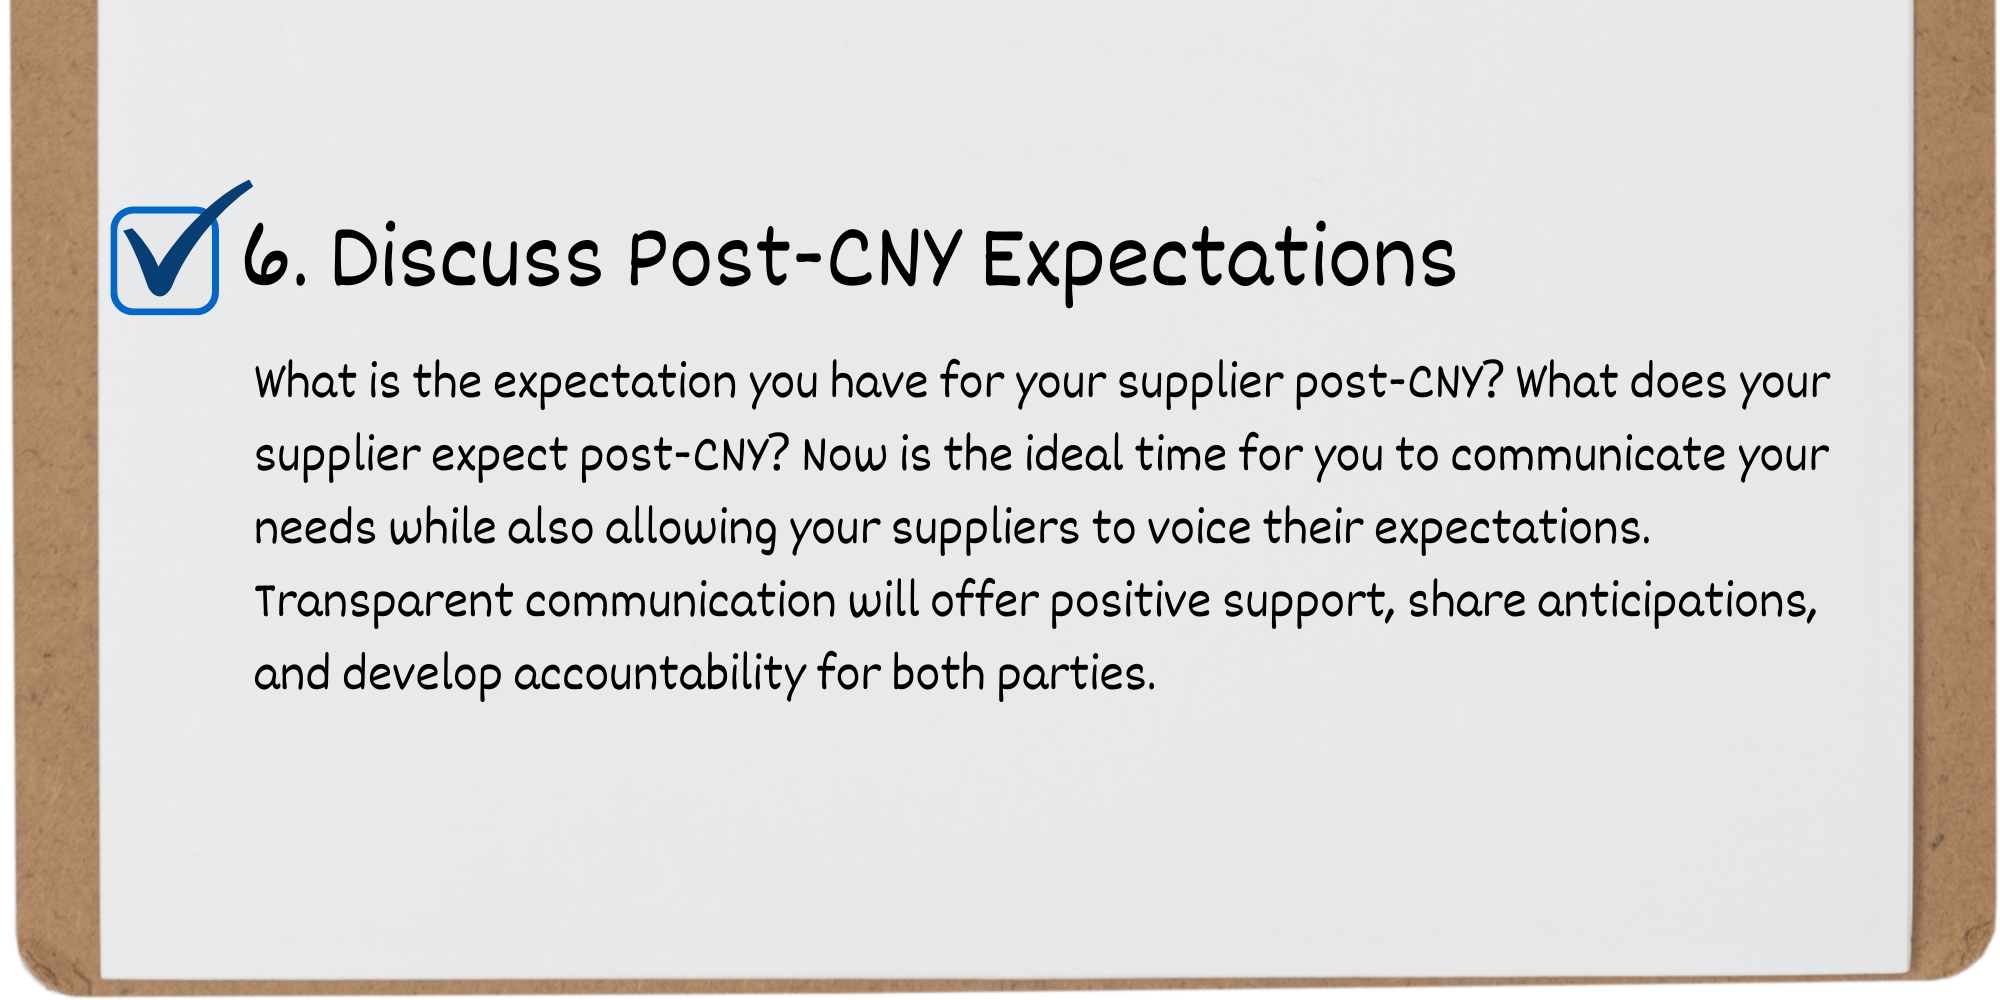 6.DiscussPost-CNY_Expectations.png 